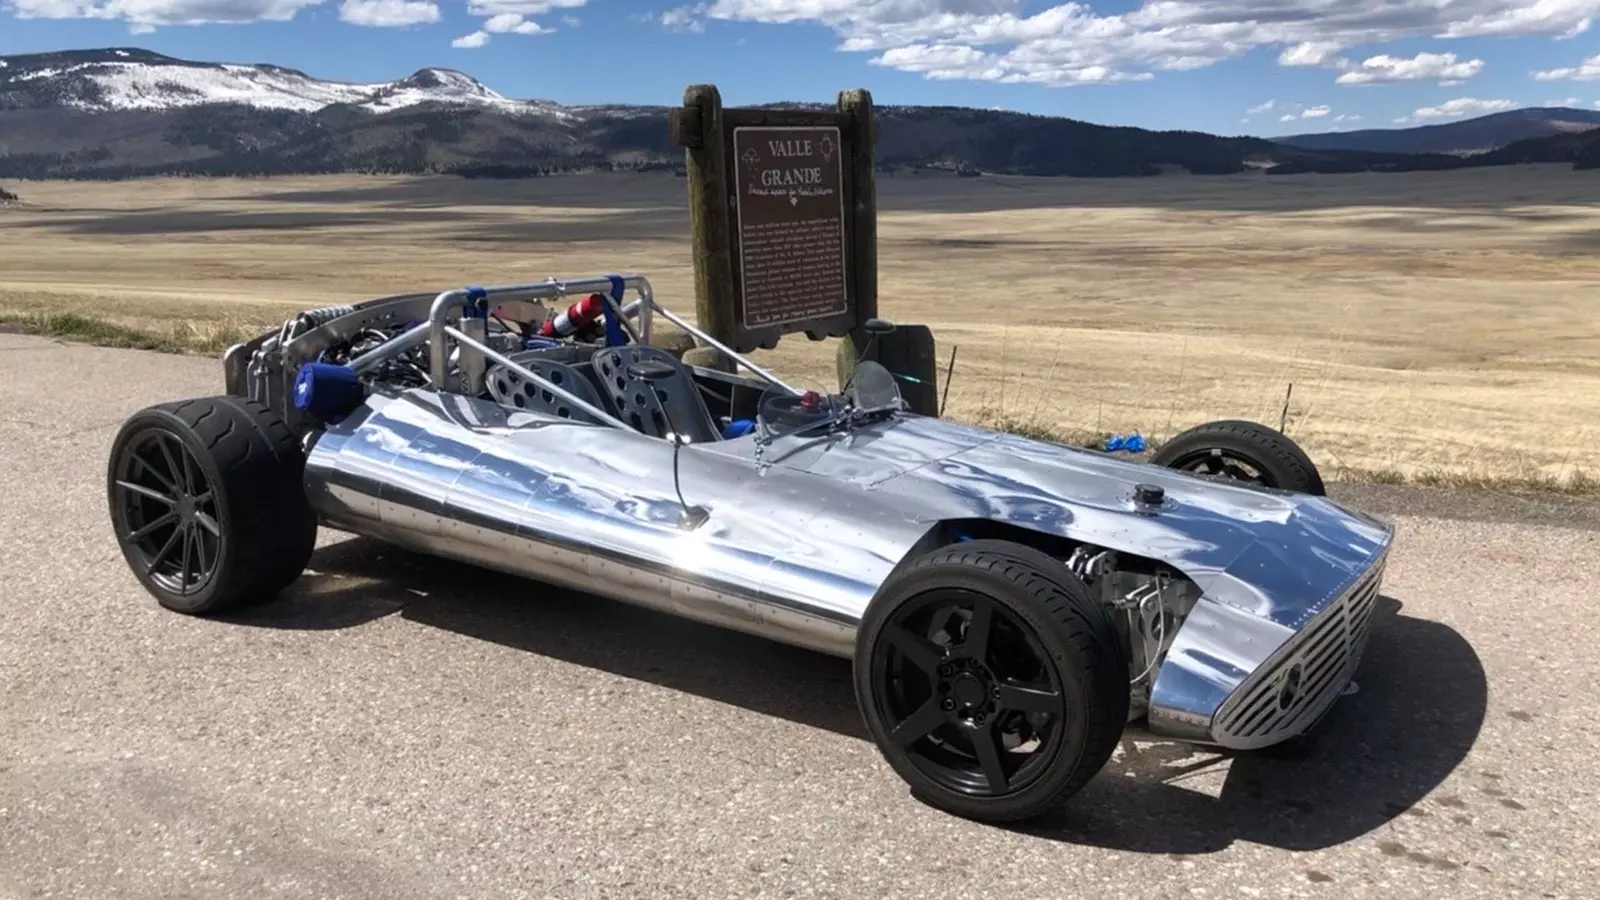 This Incredible Chrome Deathtrap Is a 70-Year-Old’s 1,500-Hour Project (and Street Legal!)